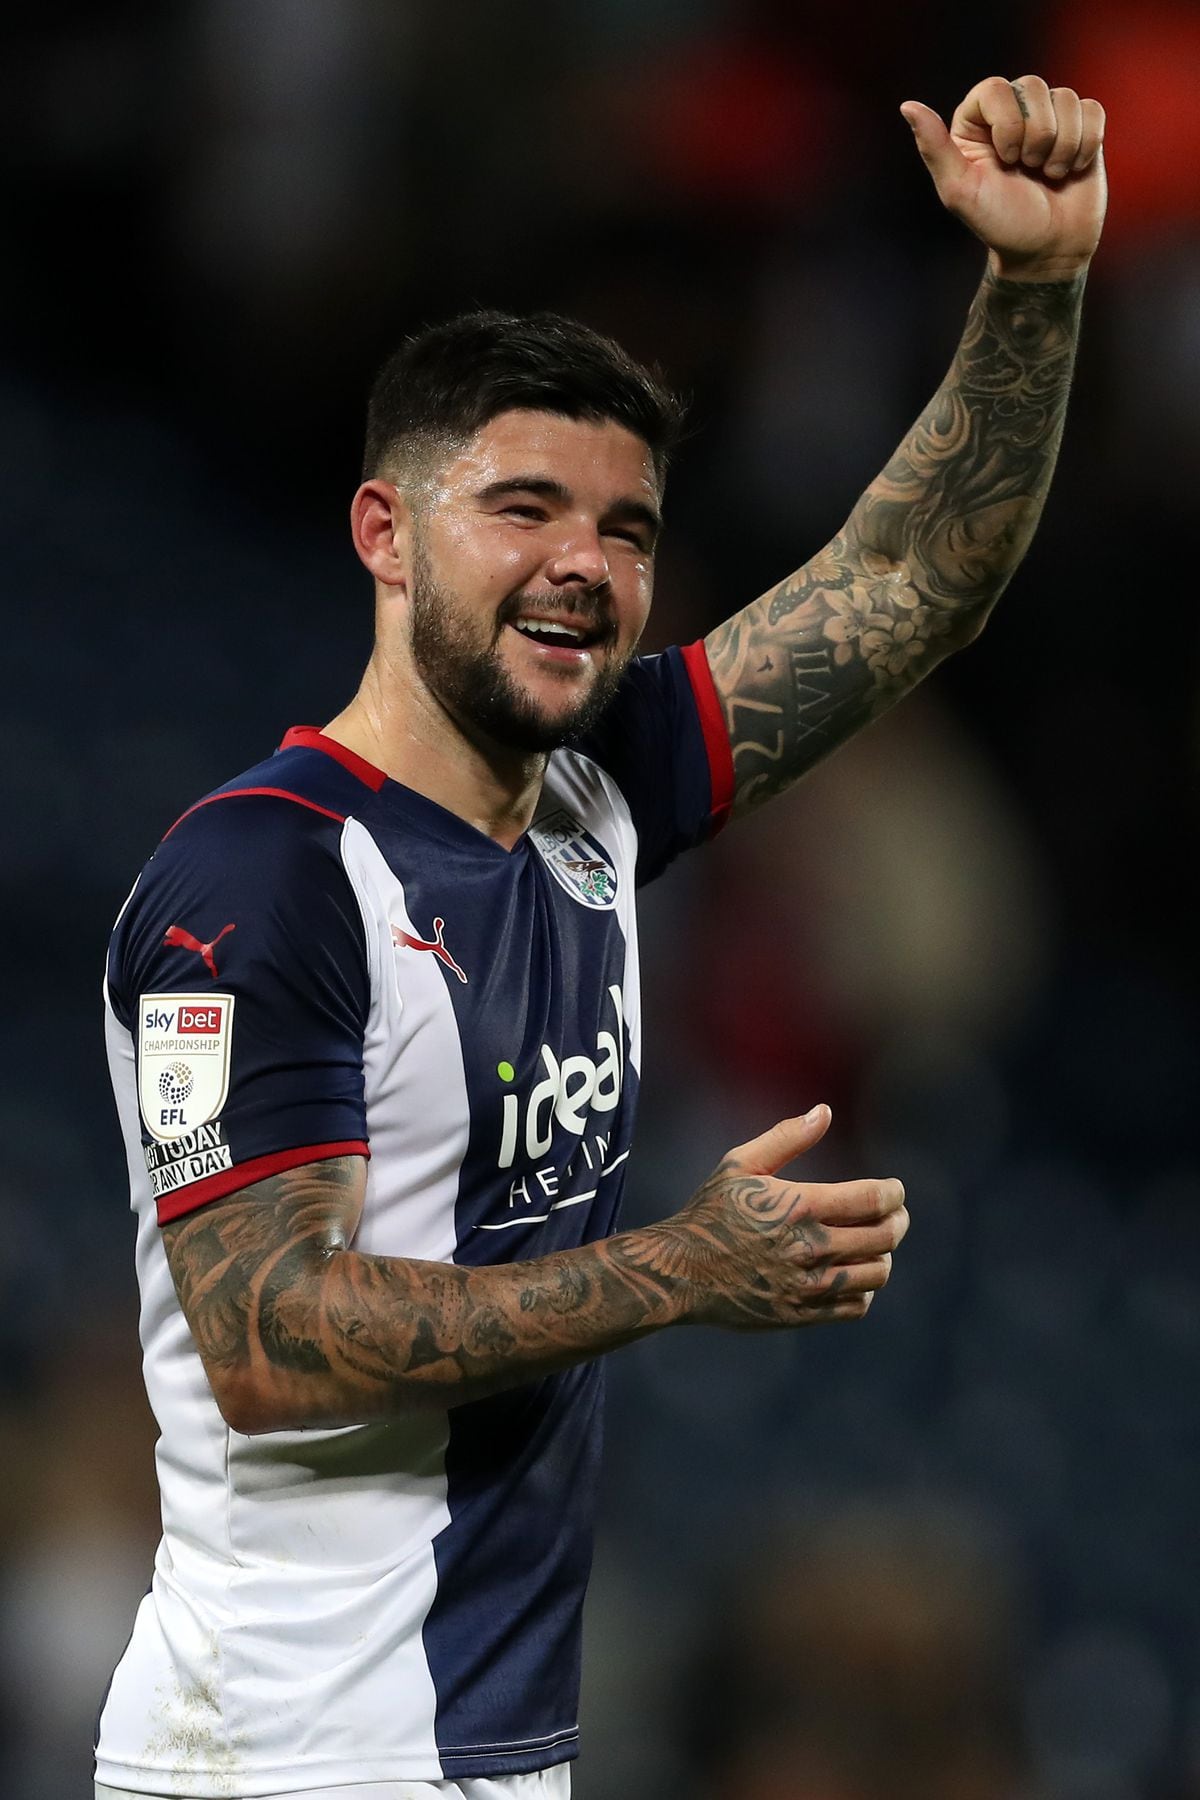 WEST BROMWICH, ENGLAND - SEPTEMBER 25: .Alex Mowatt of West Bromwich Albion fist-pumps the West Bromwich Albion Fans at the end of the match as he celebrates the 2-1 win in the Sky Bet Championship match between West Bromwich Albion and Queens Park Rangers at The Hawthorns on September 25, 2021 in West Bromwich, England. (Photo by Adam Fradgley/West Bromwich Albion FC via Getty Images).